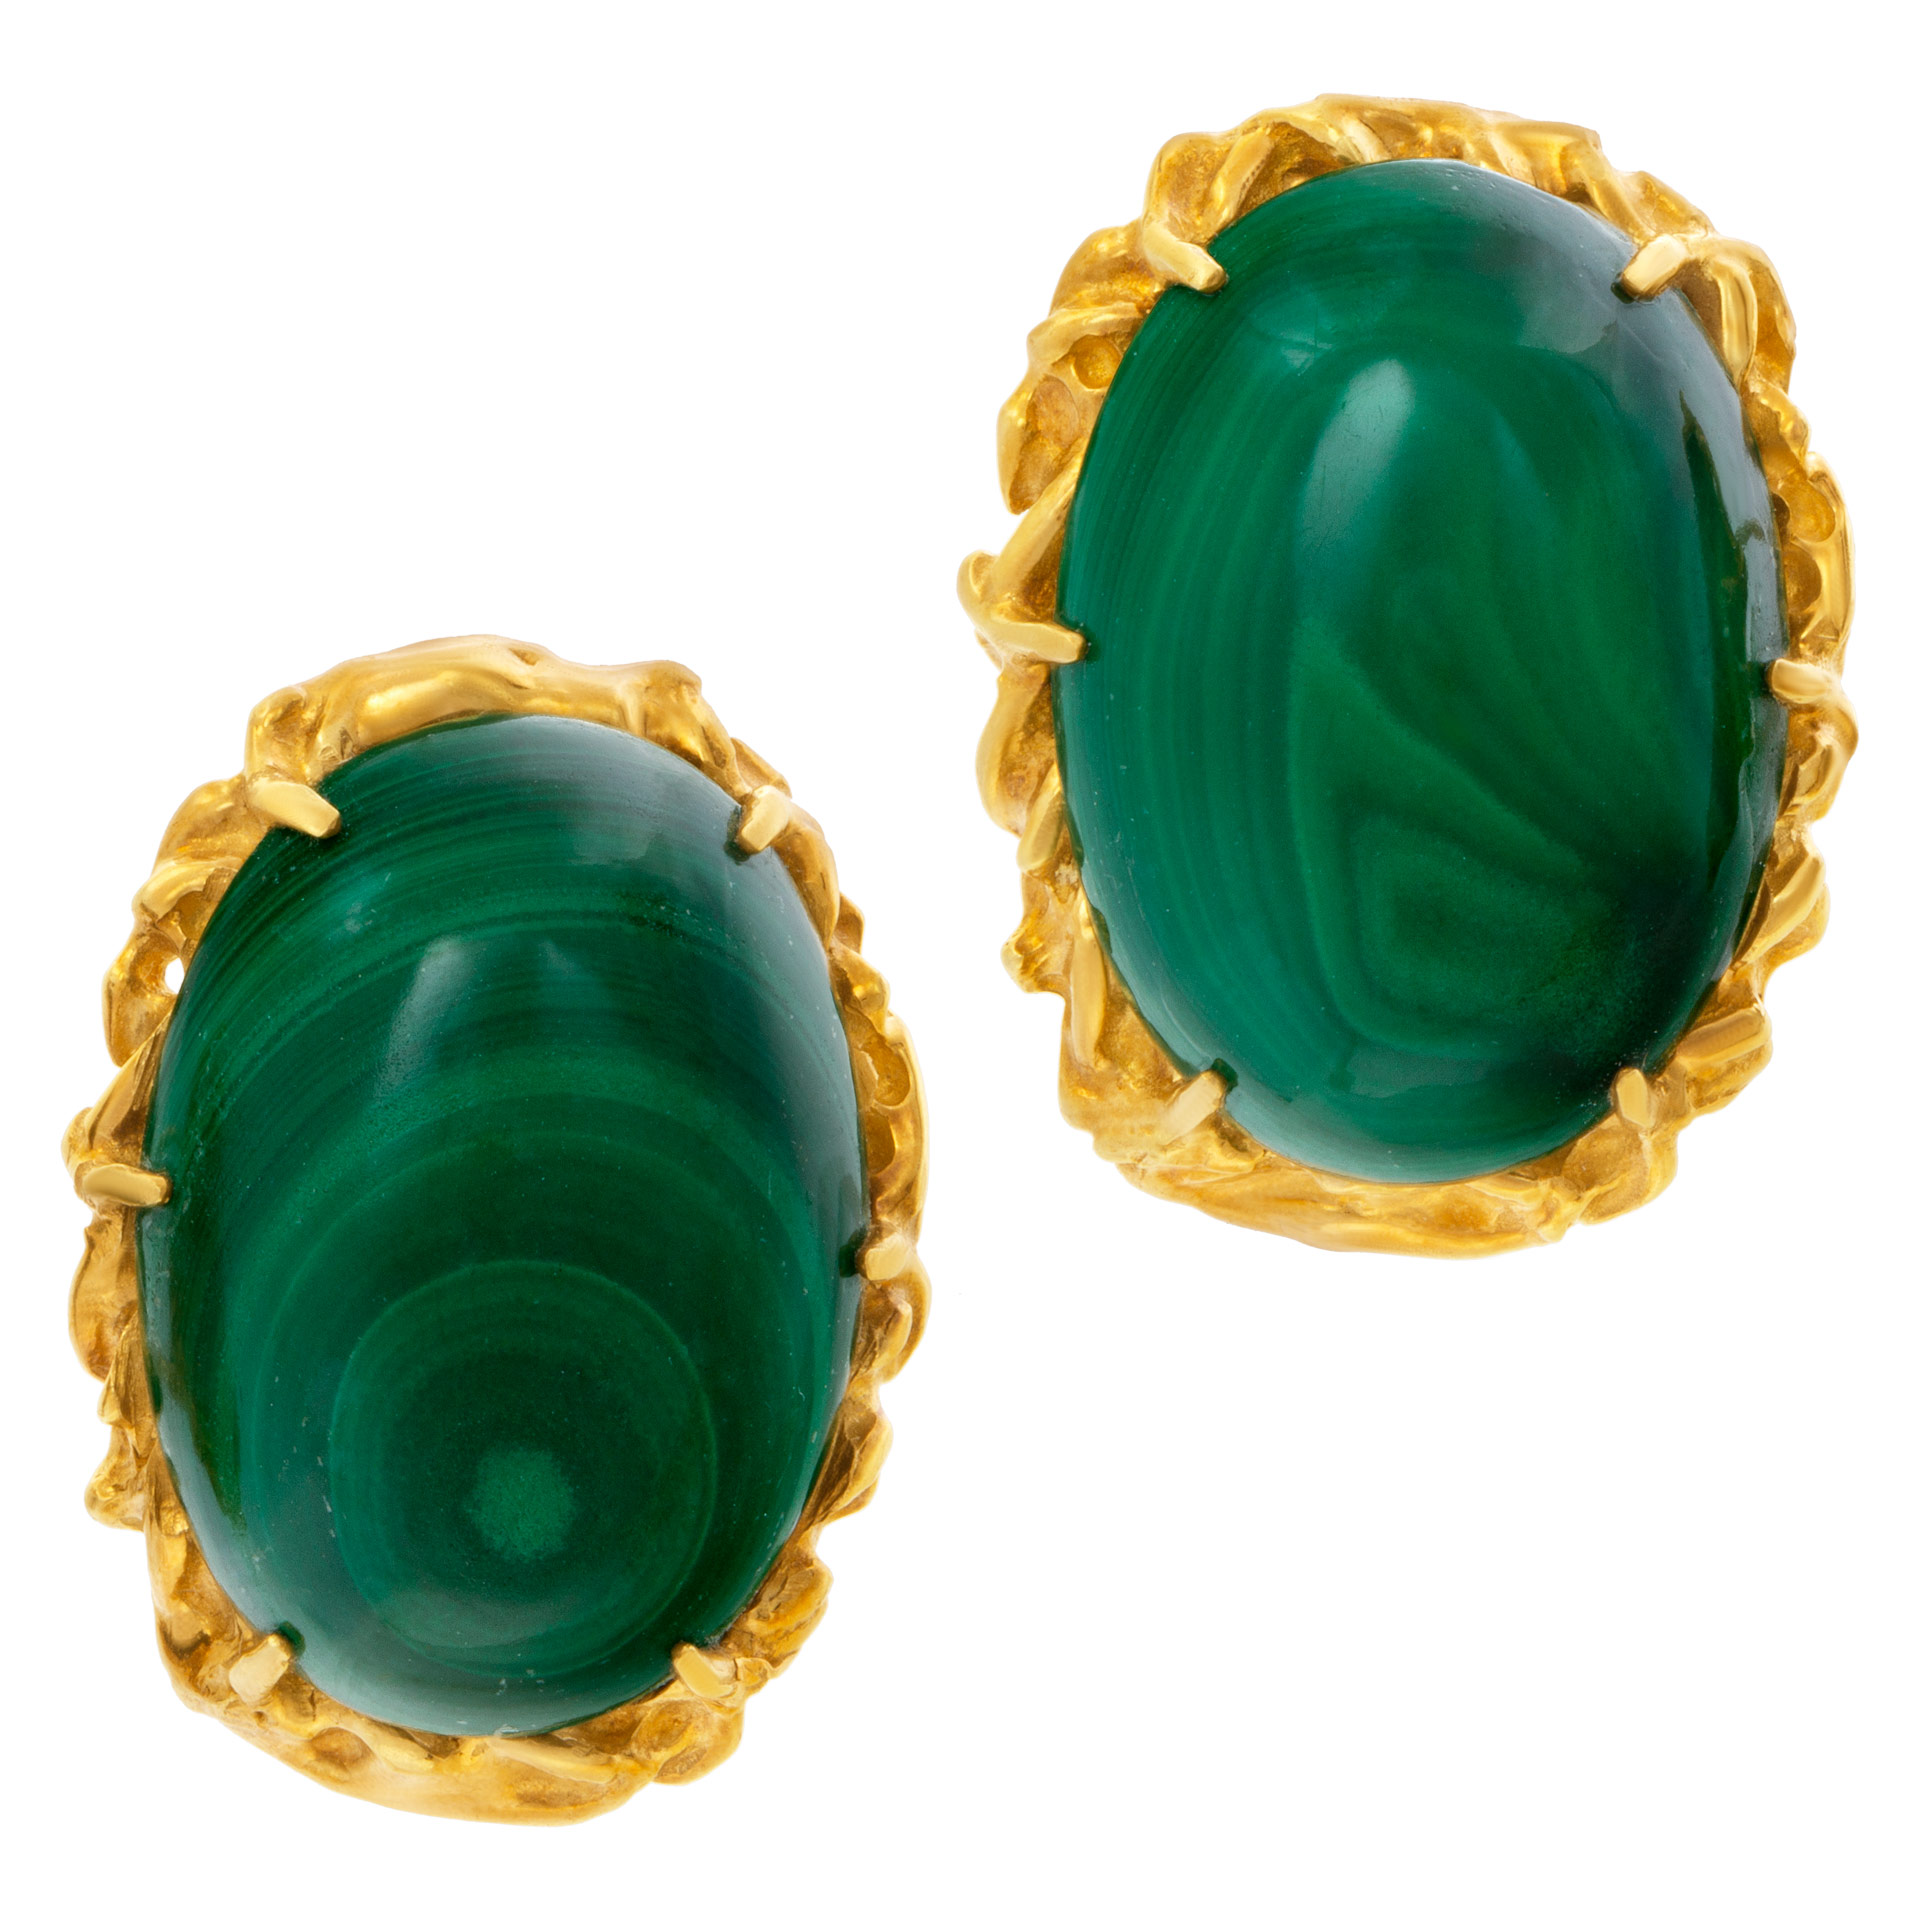 Green cabochon  Malachite earrings set in 18k yellow gold with omega clip/post back